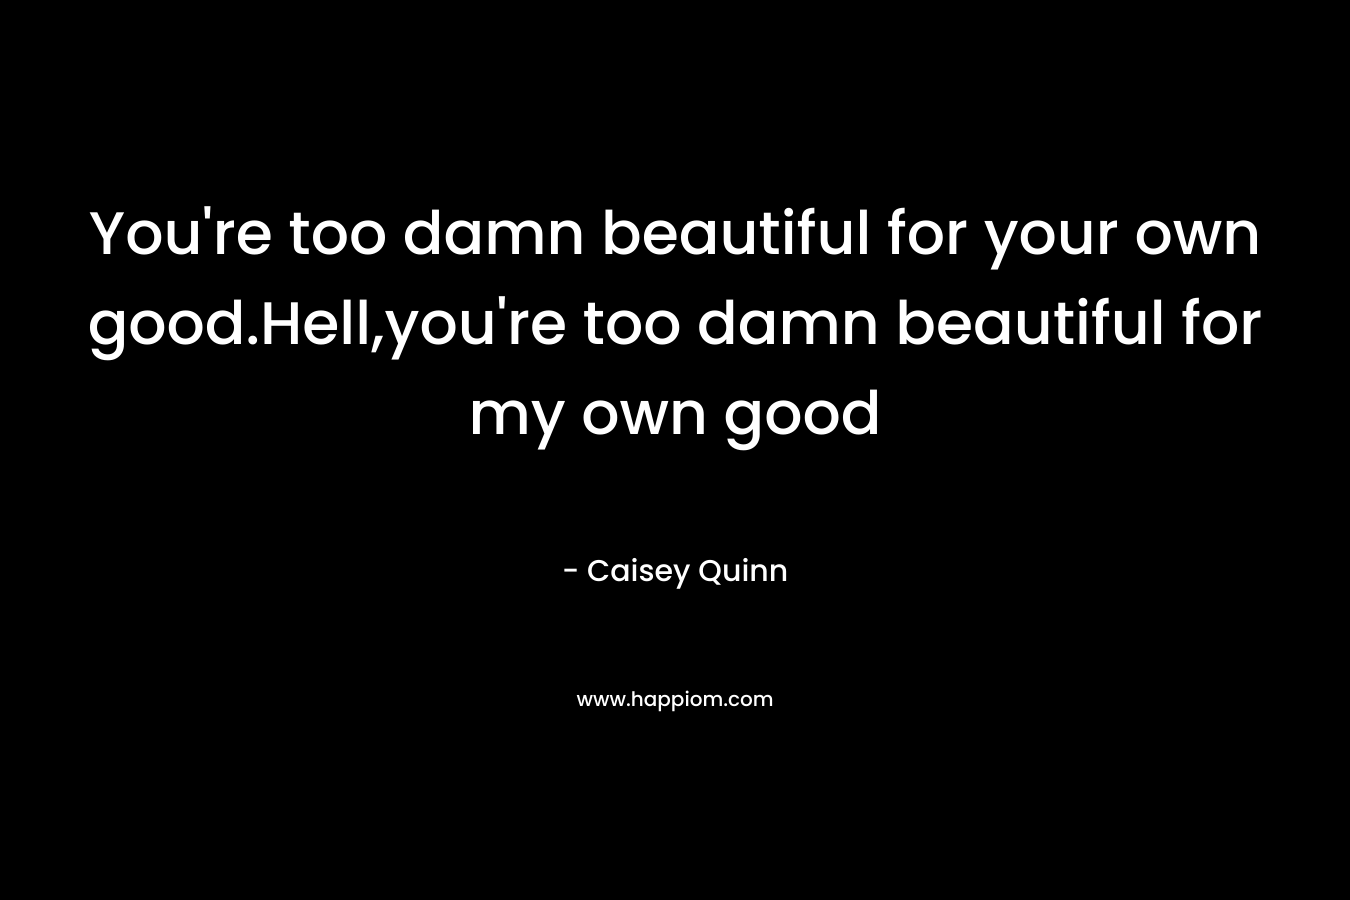 You're too damn beautiful for your own good.Hell,you're too damn beautiful for my own good